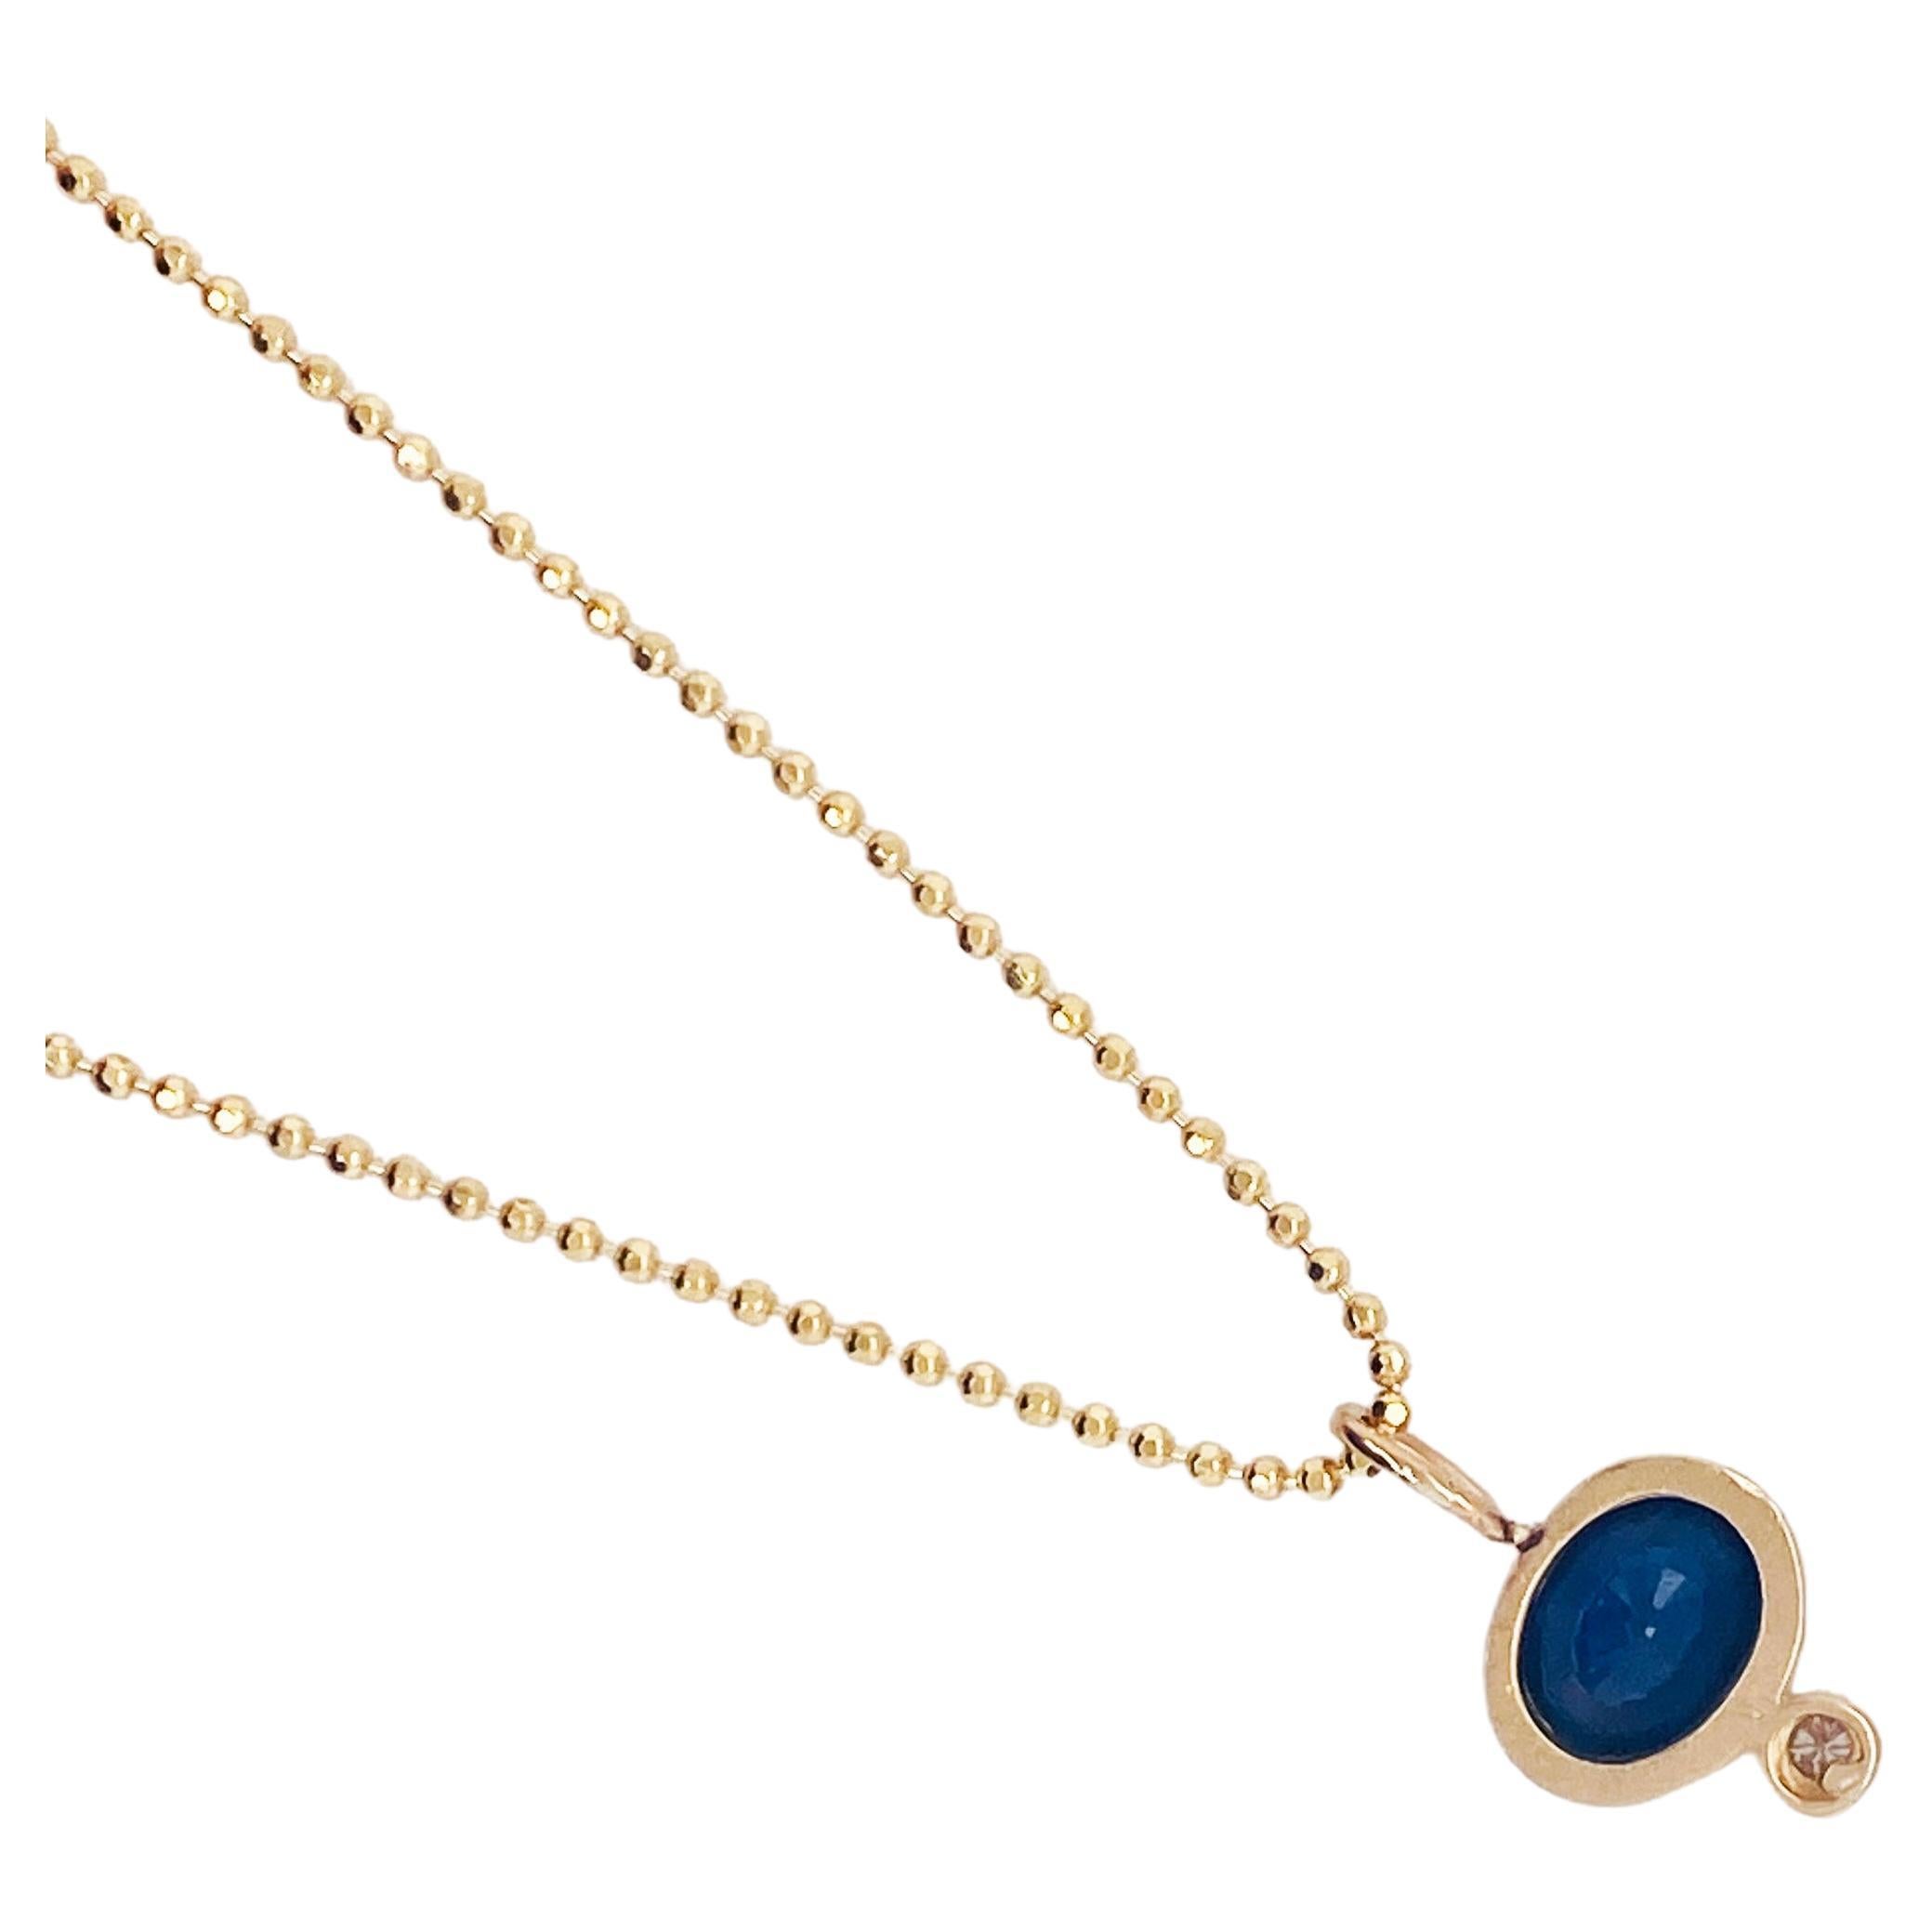 This beautiful sapphire and diamond pendant is so contemporary with its stylish bezel set gemstone and diamond and beaded chain. This is a piece that was handmade and is a one-of-a-kind design from Austin's favorite jewelry store-Five Star Jewelry!